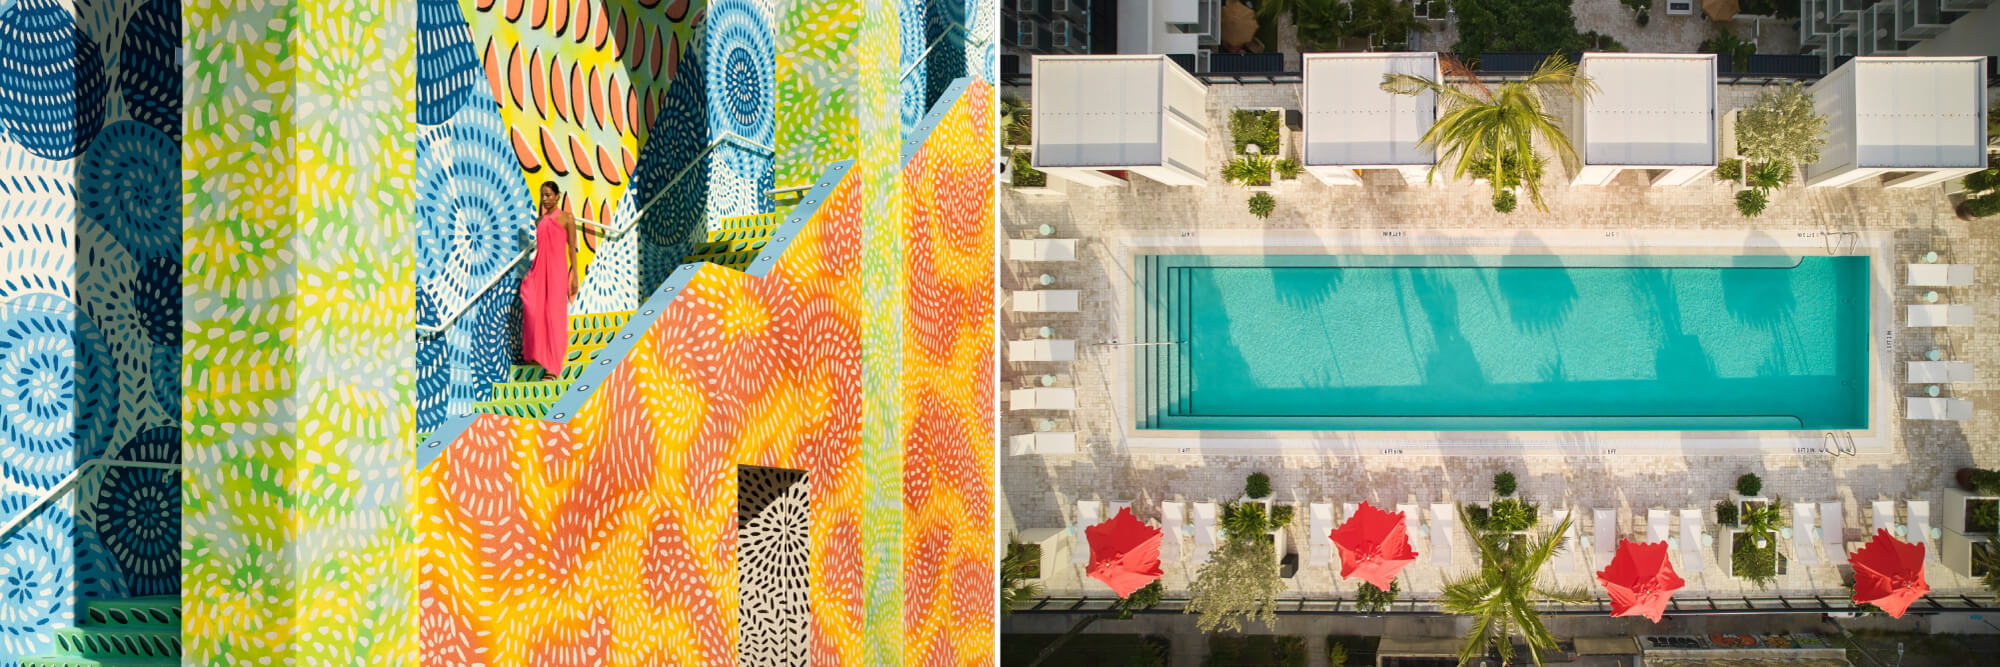 Arlo Hotel in the Wynwood area sparks creativity for your next stay